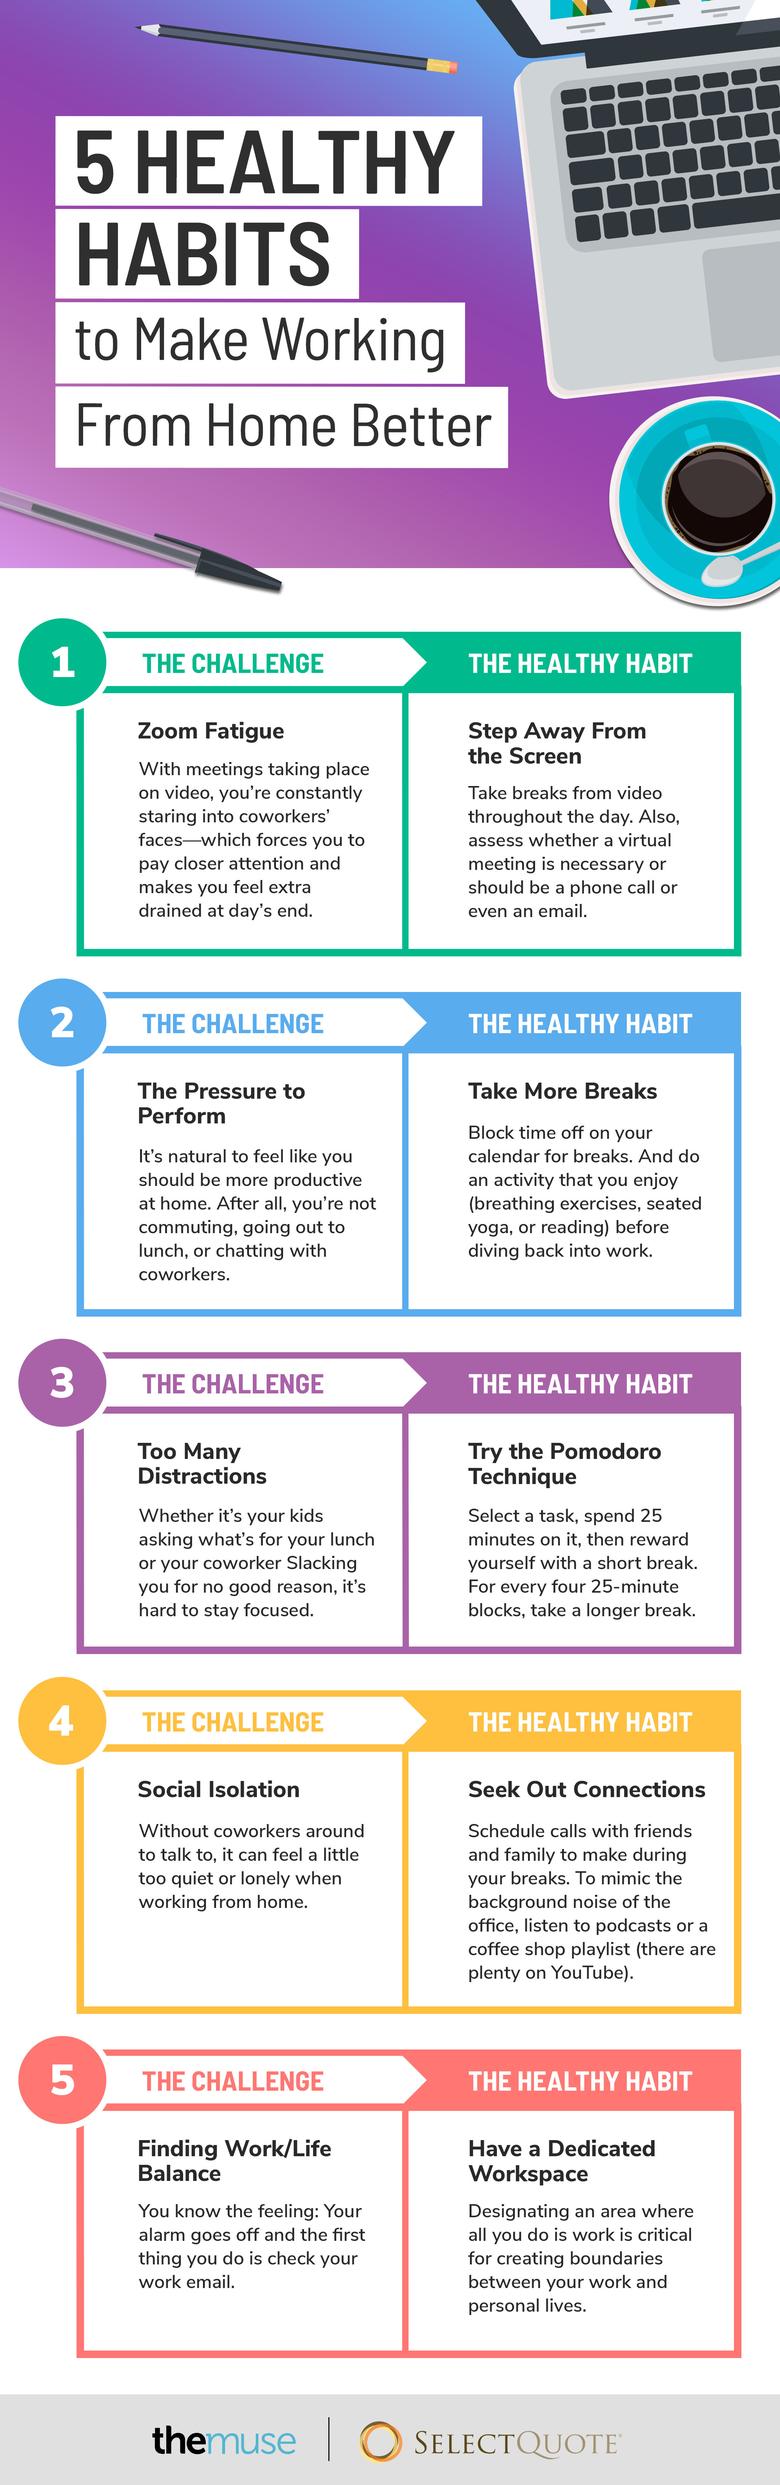 infographic about healthy habits to adopt while working from home; full text in article